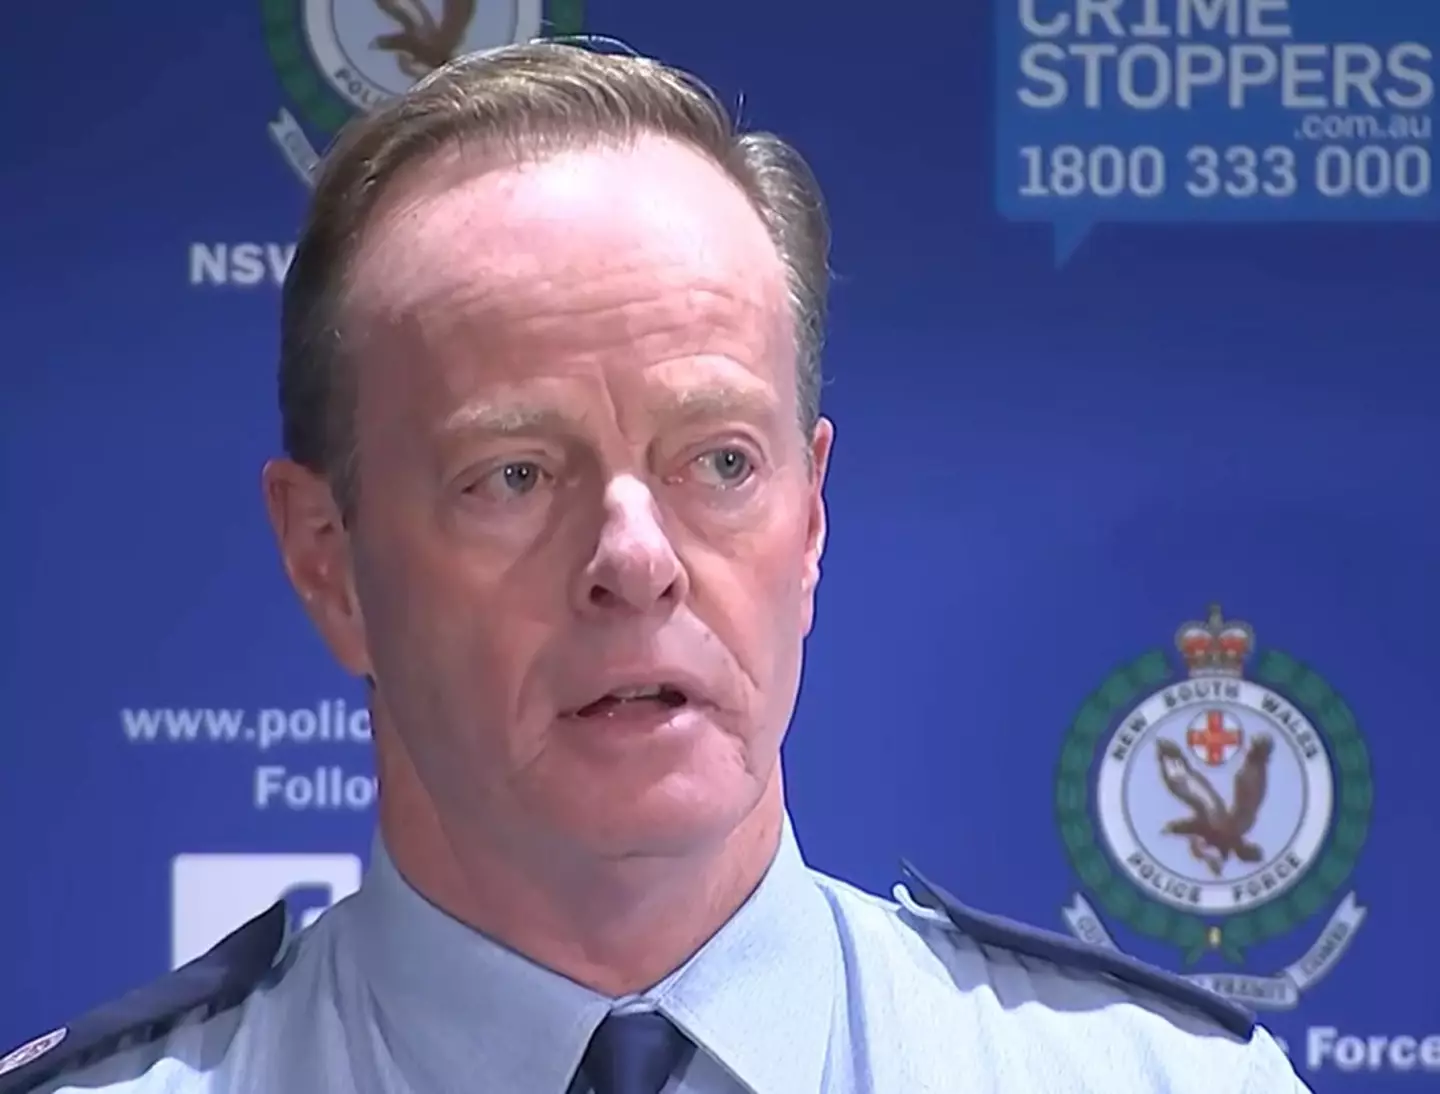 Peter Cotter of the New South Wales Police provided information on the tasering of Clare Nowland.